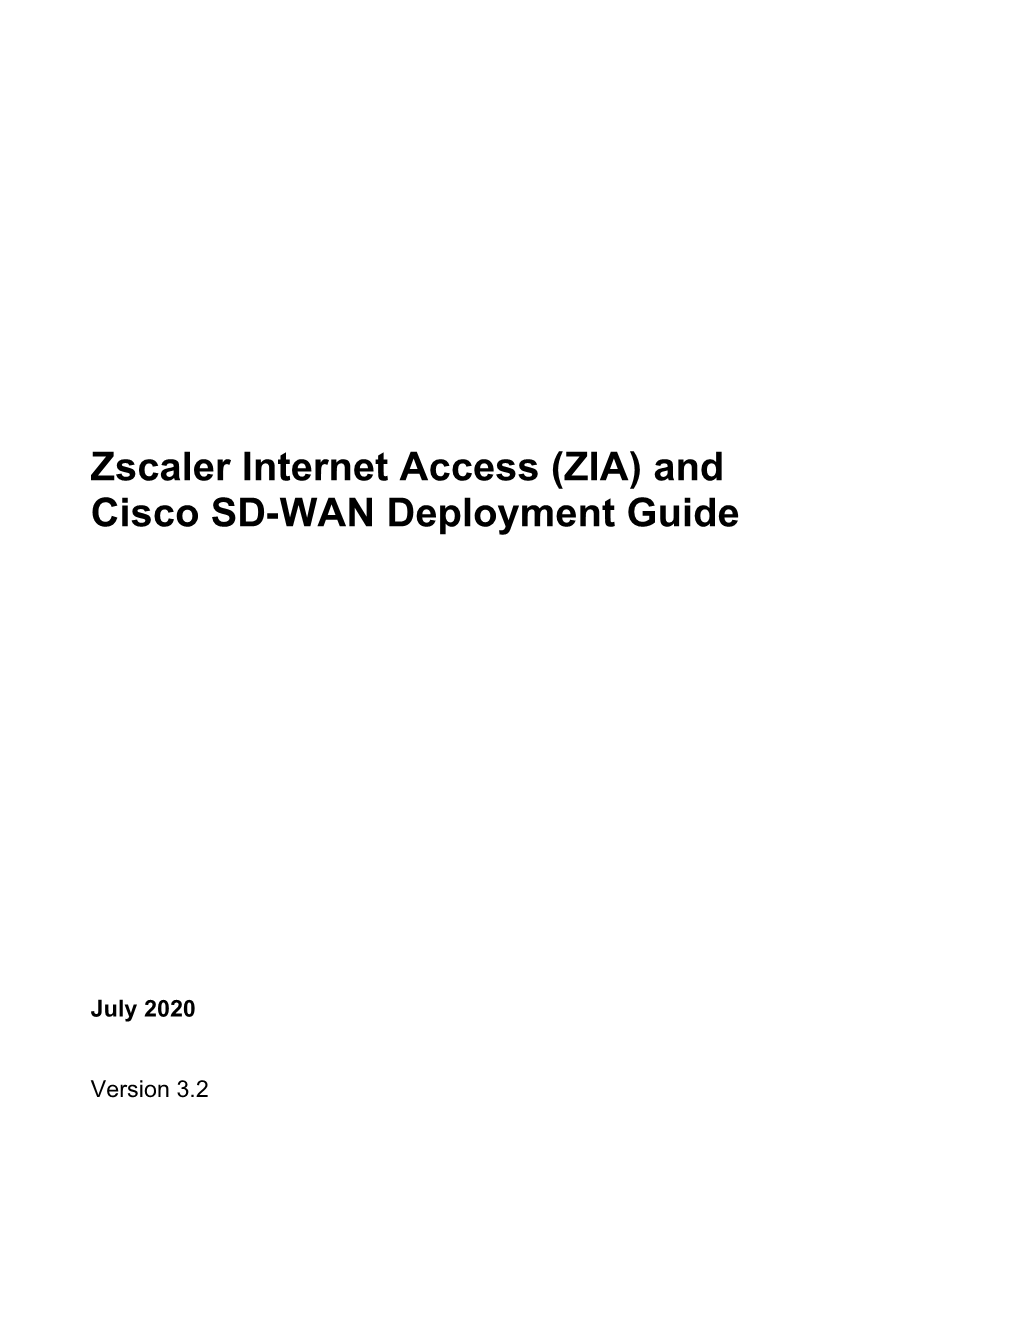 Zscaler and Cisco SD-WAN (Viptela) Deployment Guide